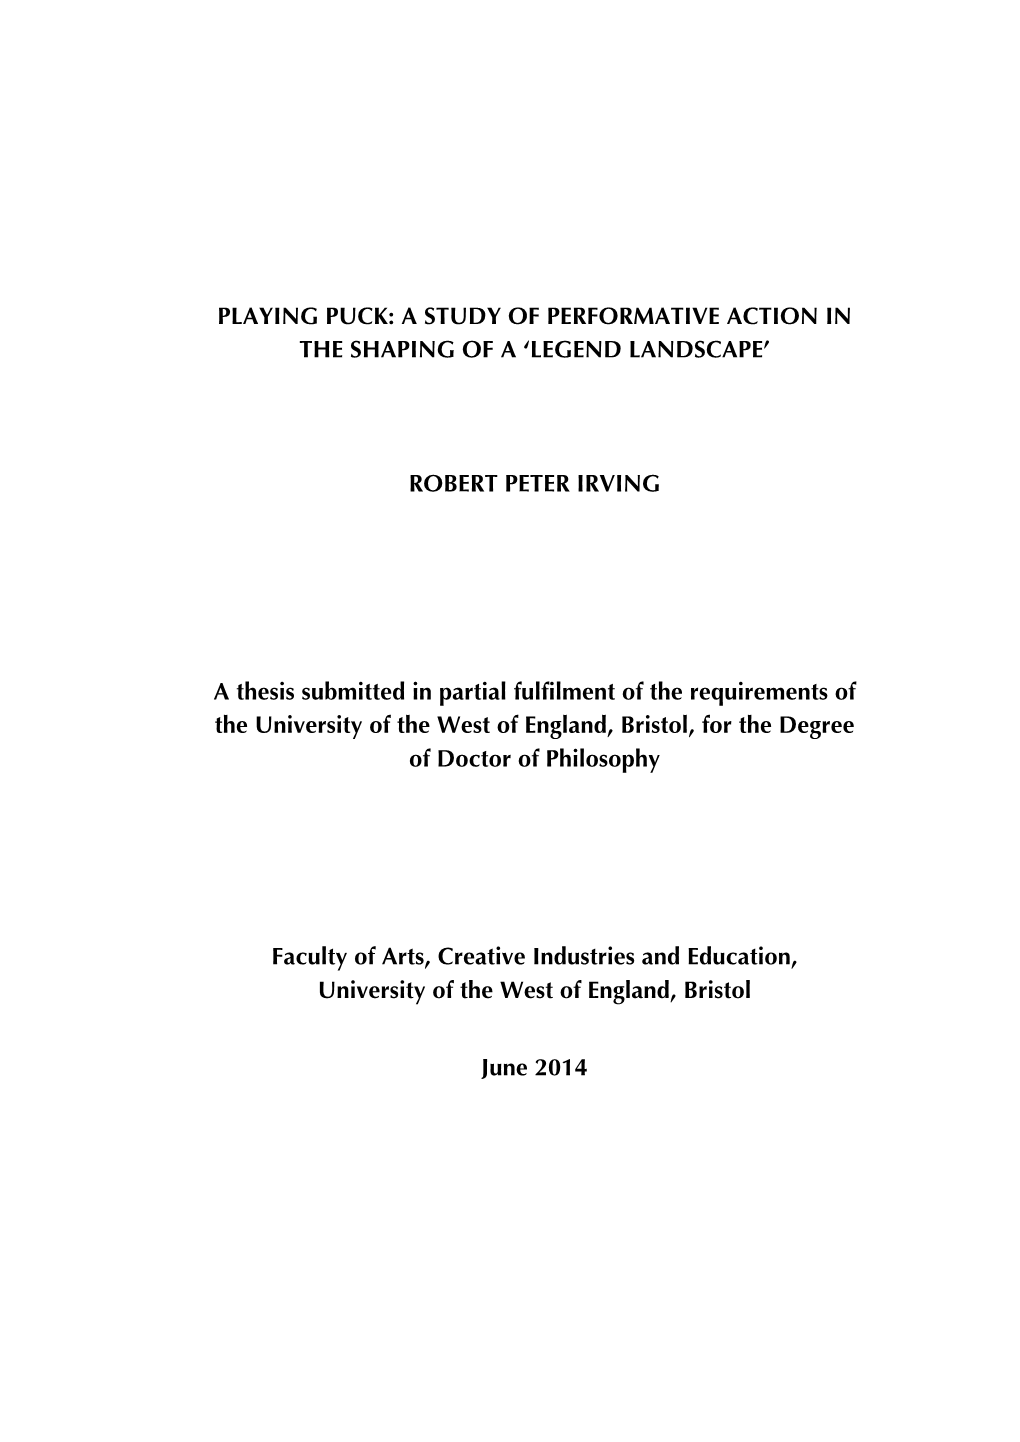 Playing Puck: a Study of Performative Action in the Shaping of a ‘Legend Landscape’